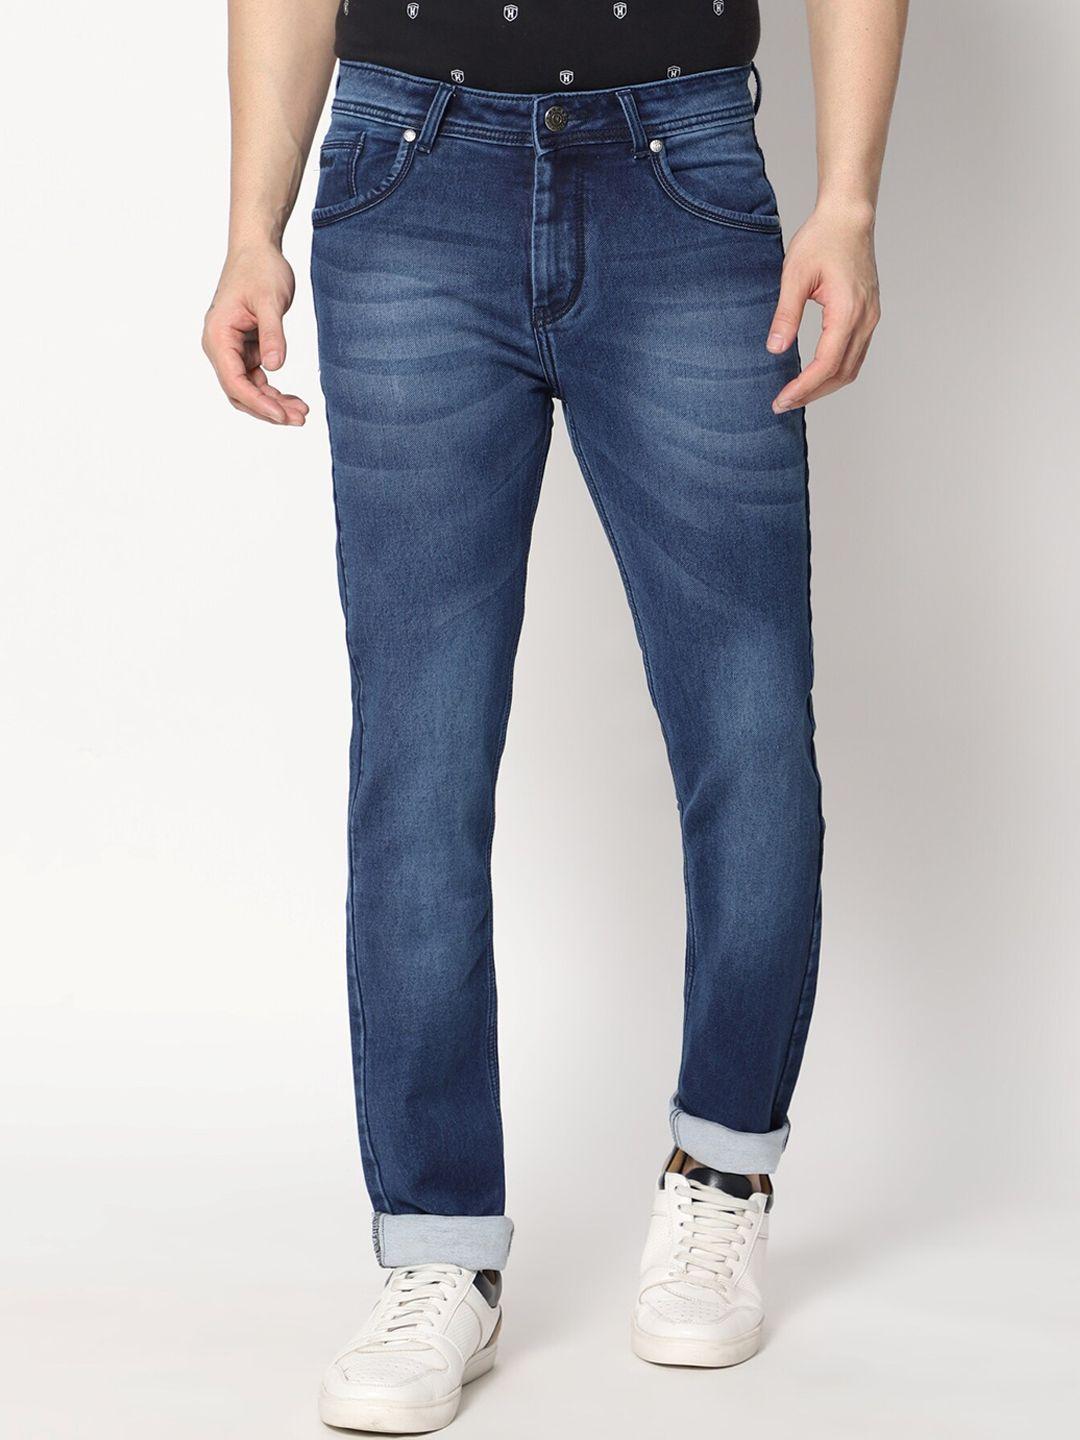 hj-hasasi-men-navy-blue-light-fade-stretchable-jeans